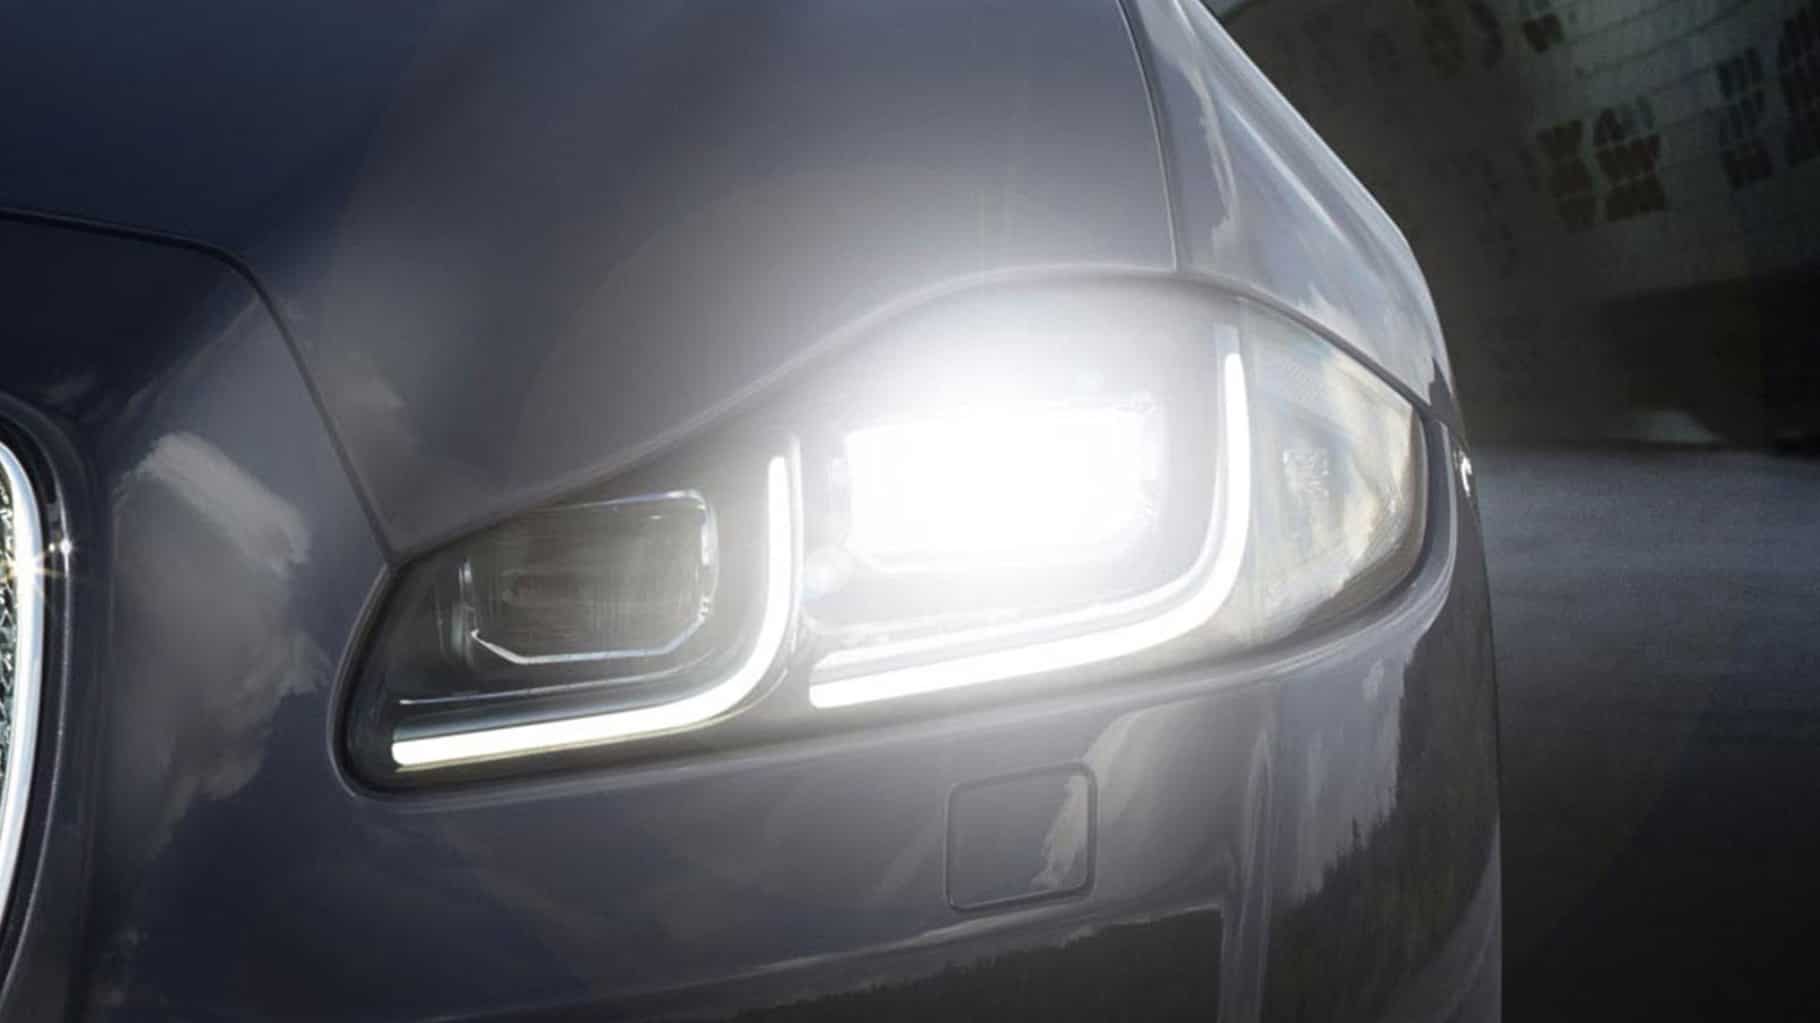 Automatic Headlamps and Intelligent High Beam Assist